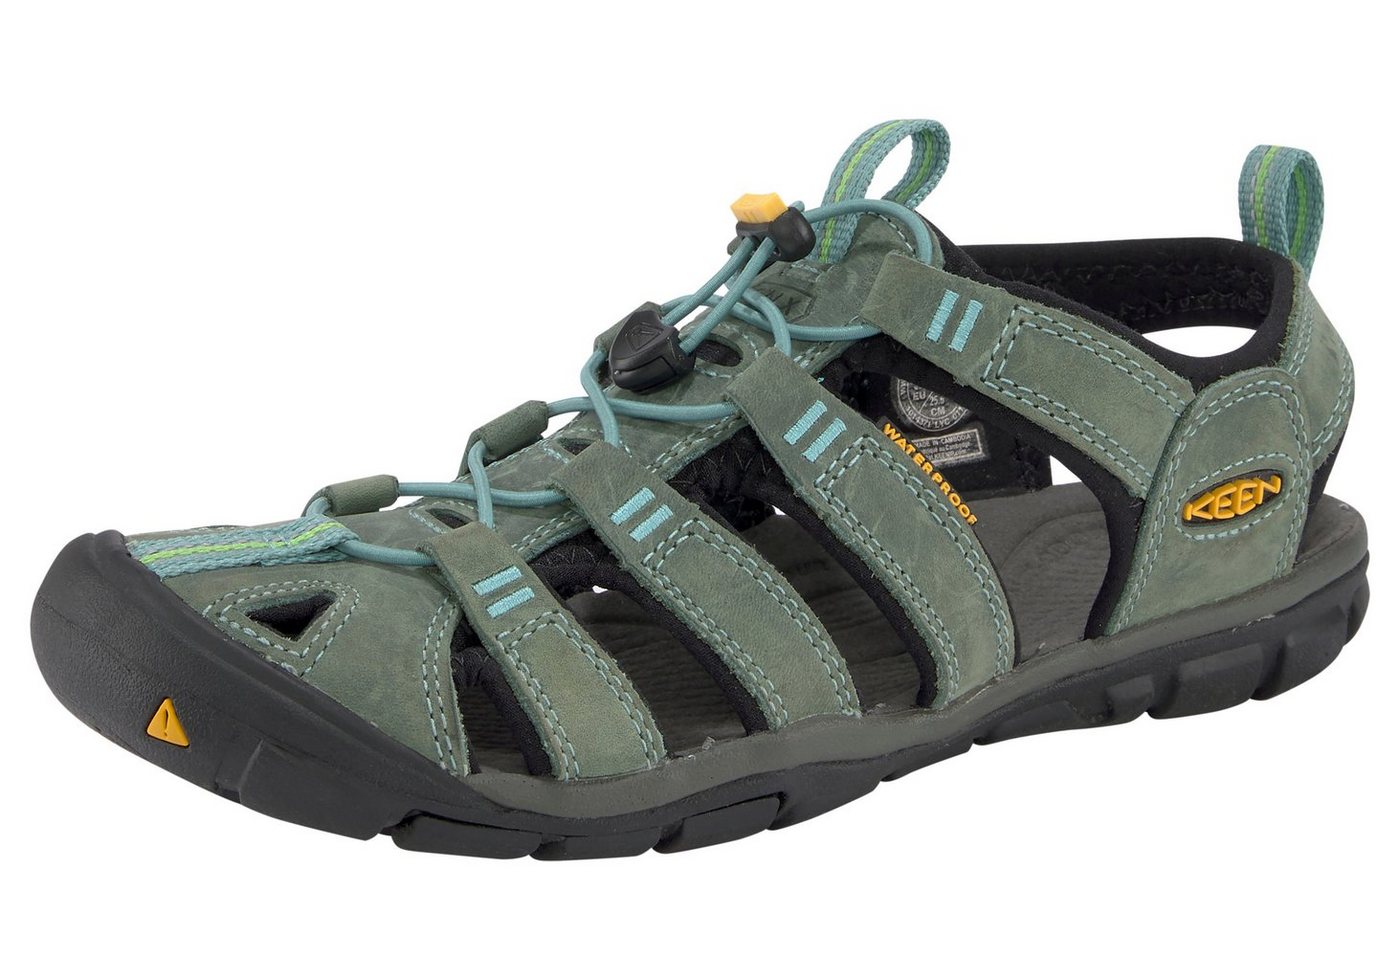 Keen CLEARWATER CNX LEATHER Sandale von Keen